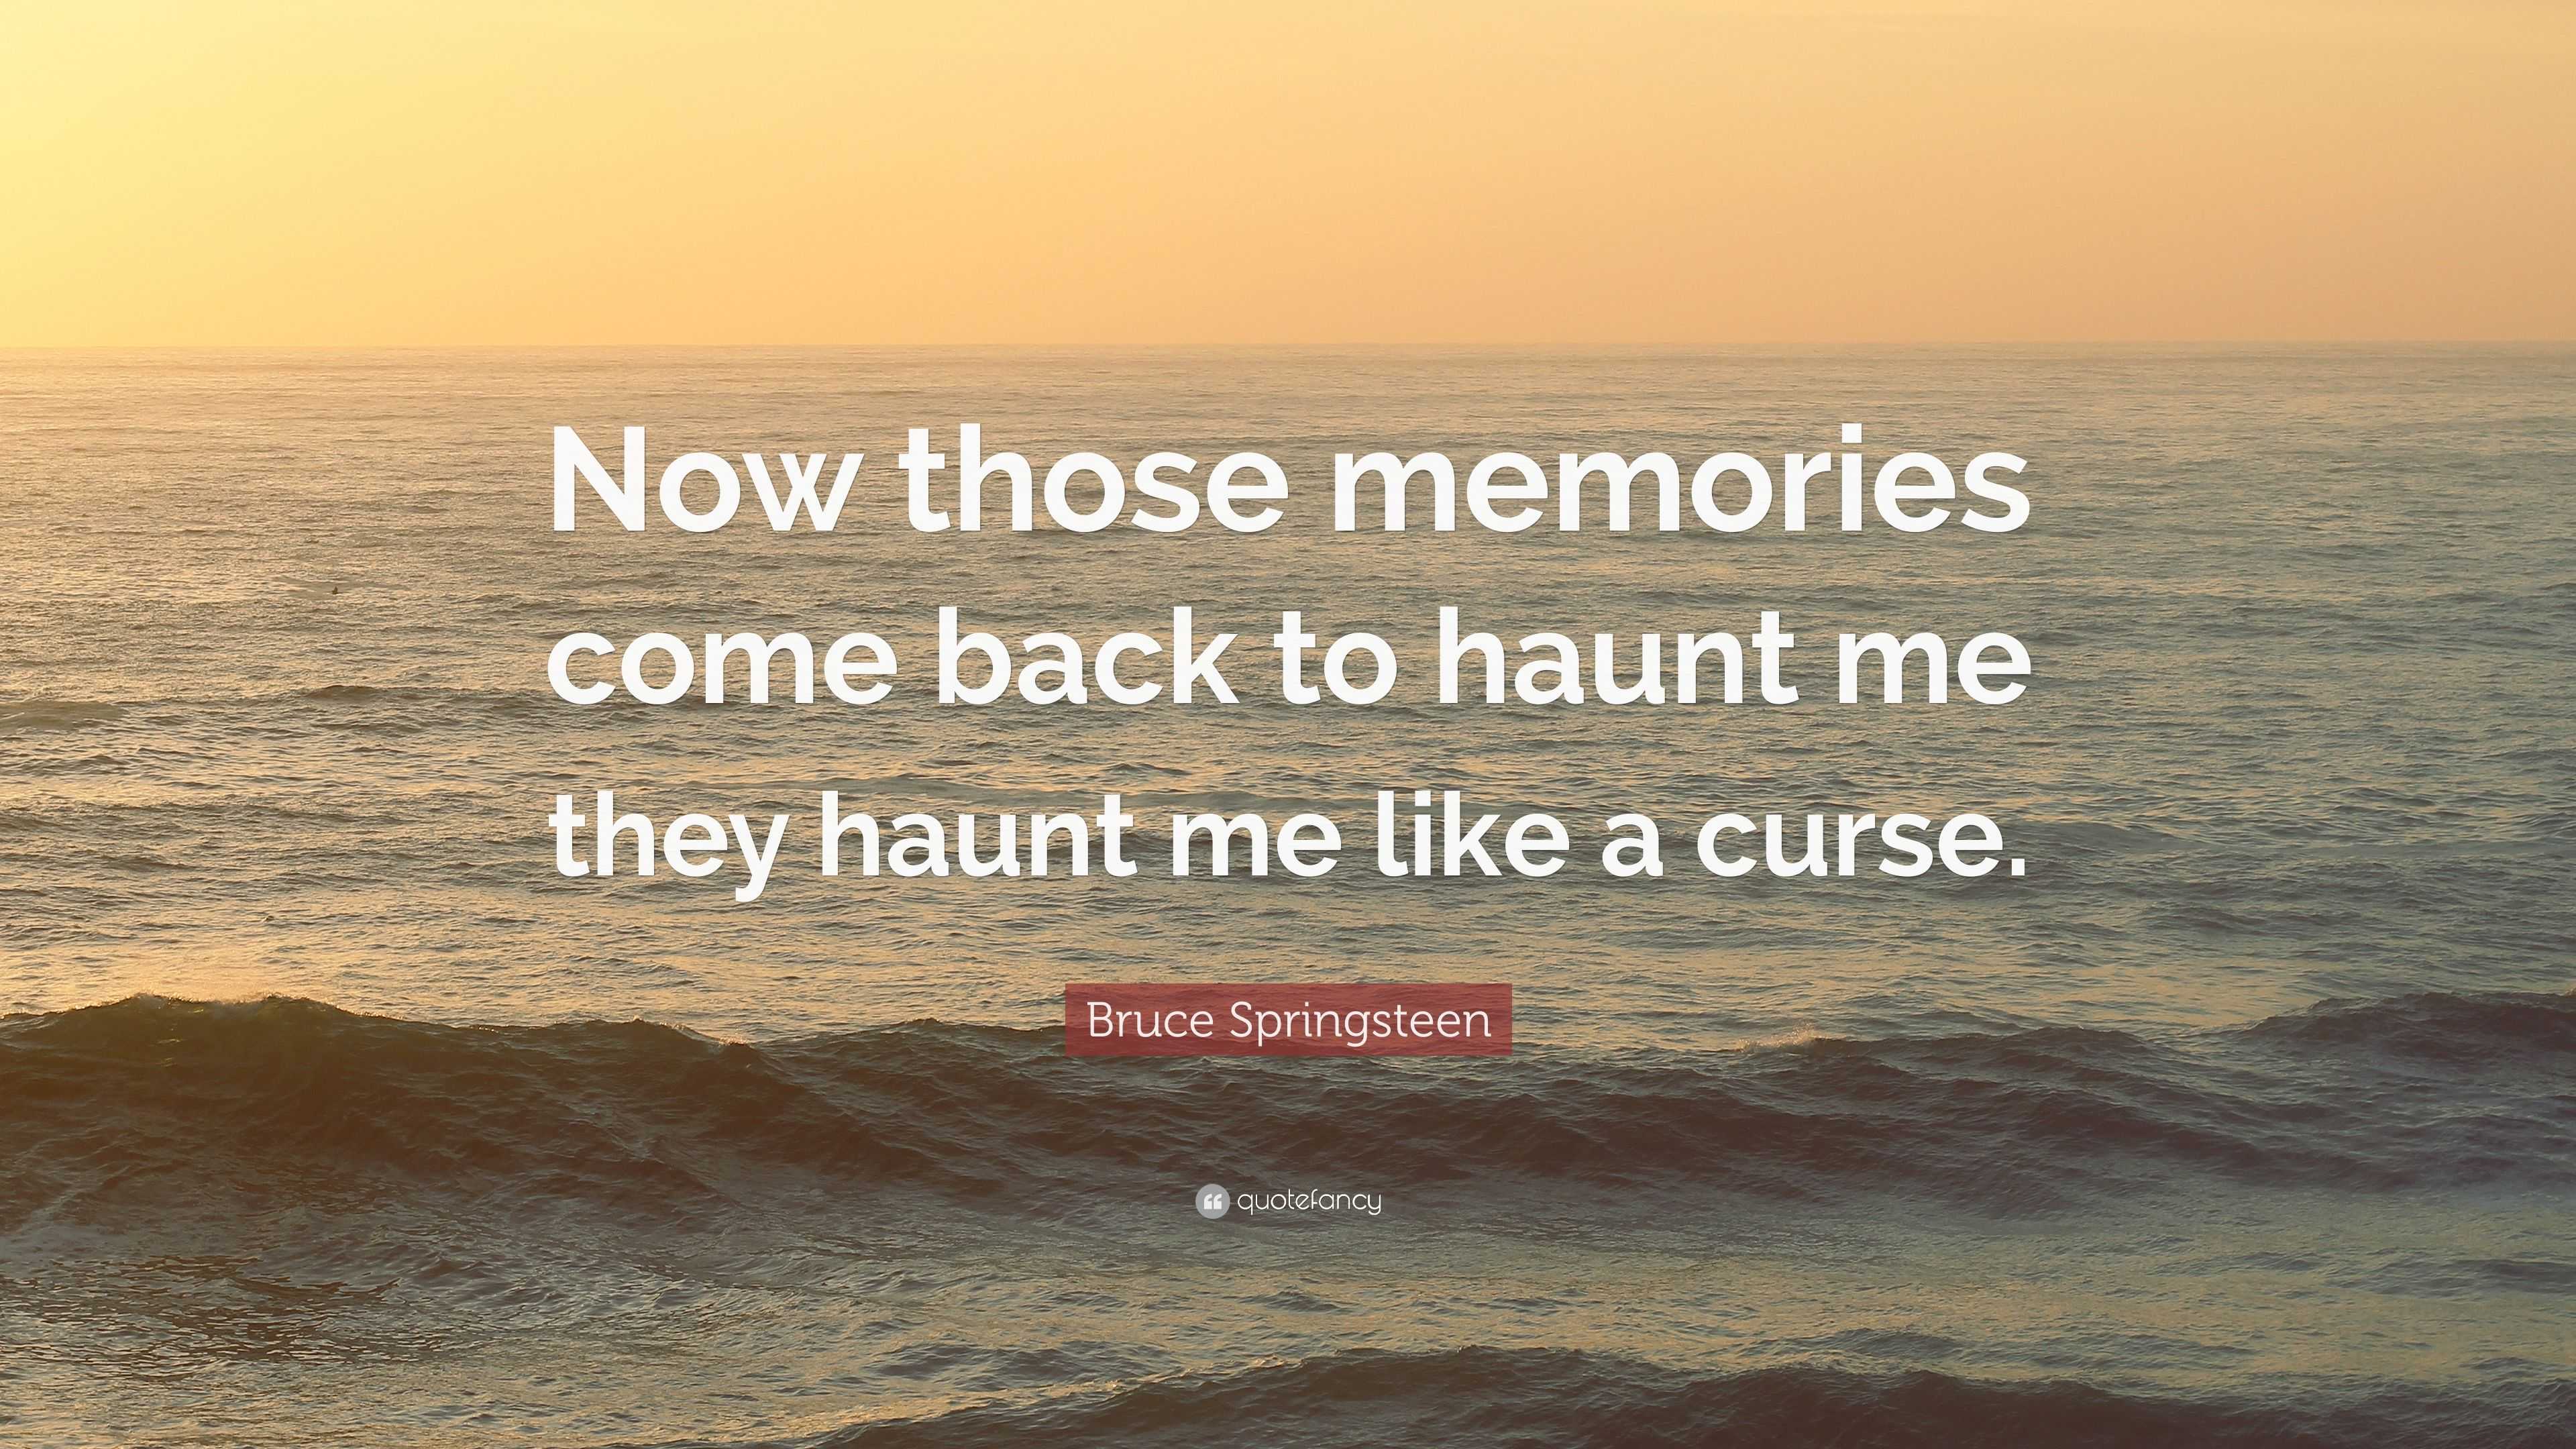 Bruce Springsteen Quote “Now those memories come back to haunt me they